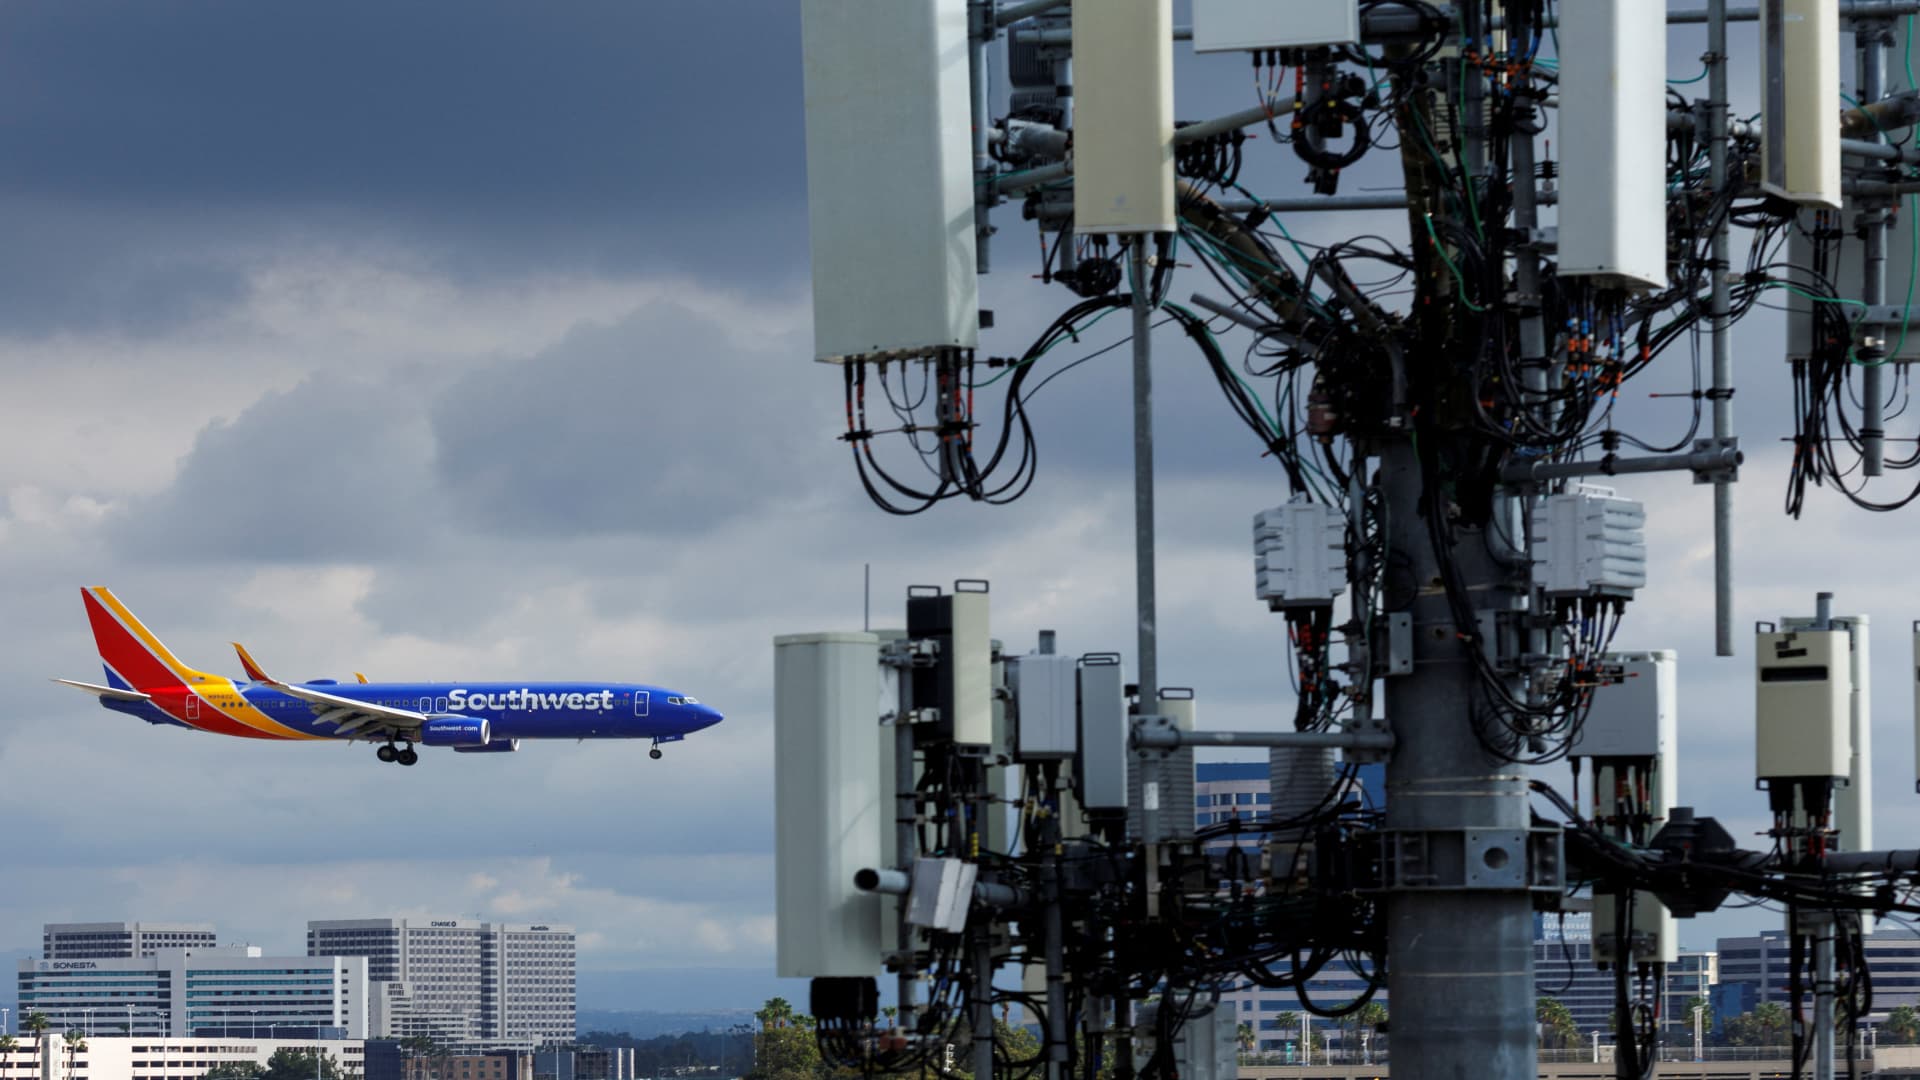 A Southwest commercial aircraft flies near a cell phone tower as it approaches to land at John Wayne Airport in Santa Ana, California U.S. January 18, 2022. U.S. airlines said on Wednesday the rollout of new 5G services was having only a minor impact on air travel as the U.S. Federal Aviation Administration (FAA) said it has issued new approvals to allow more low-visibility landings. 